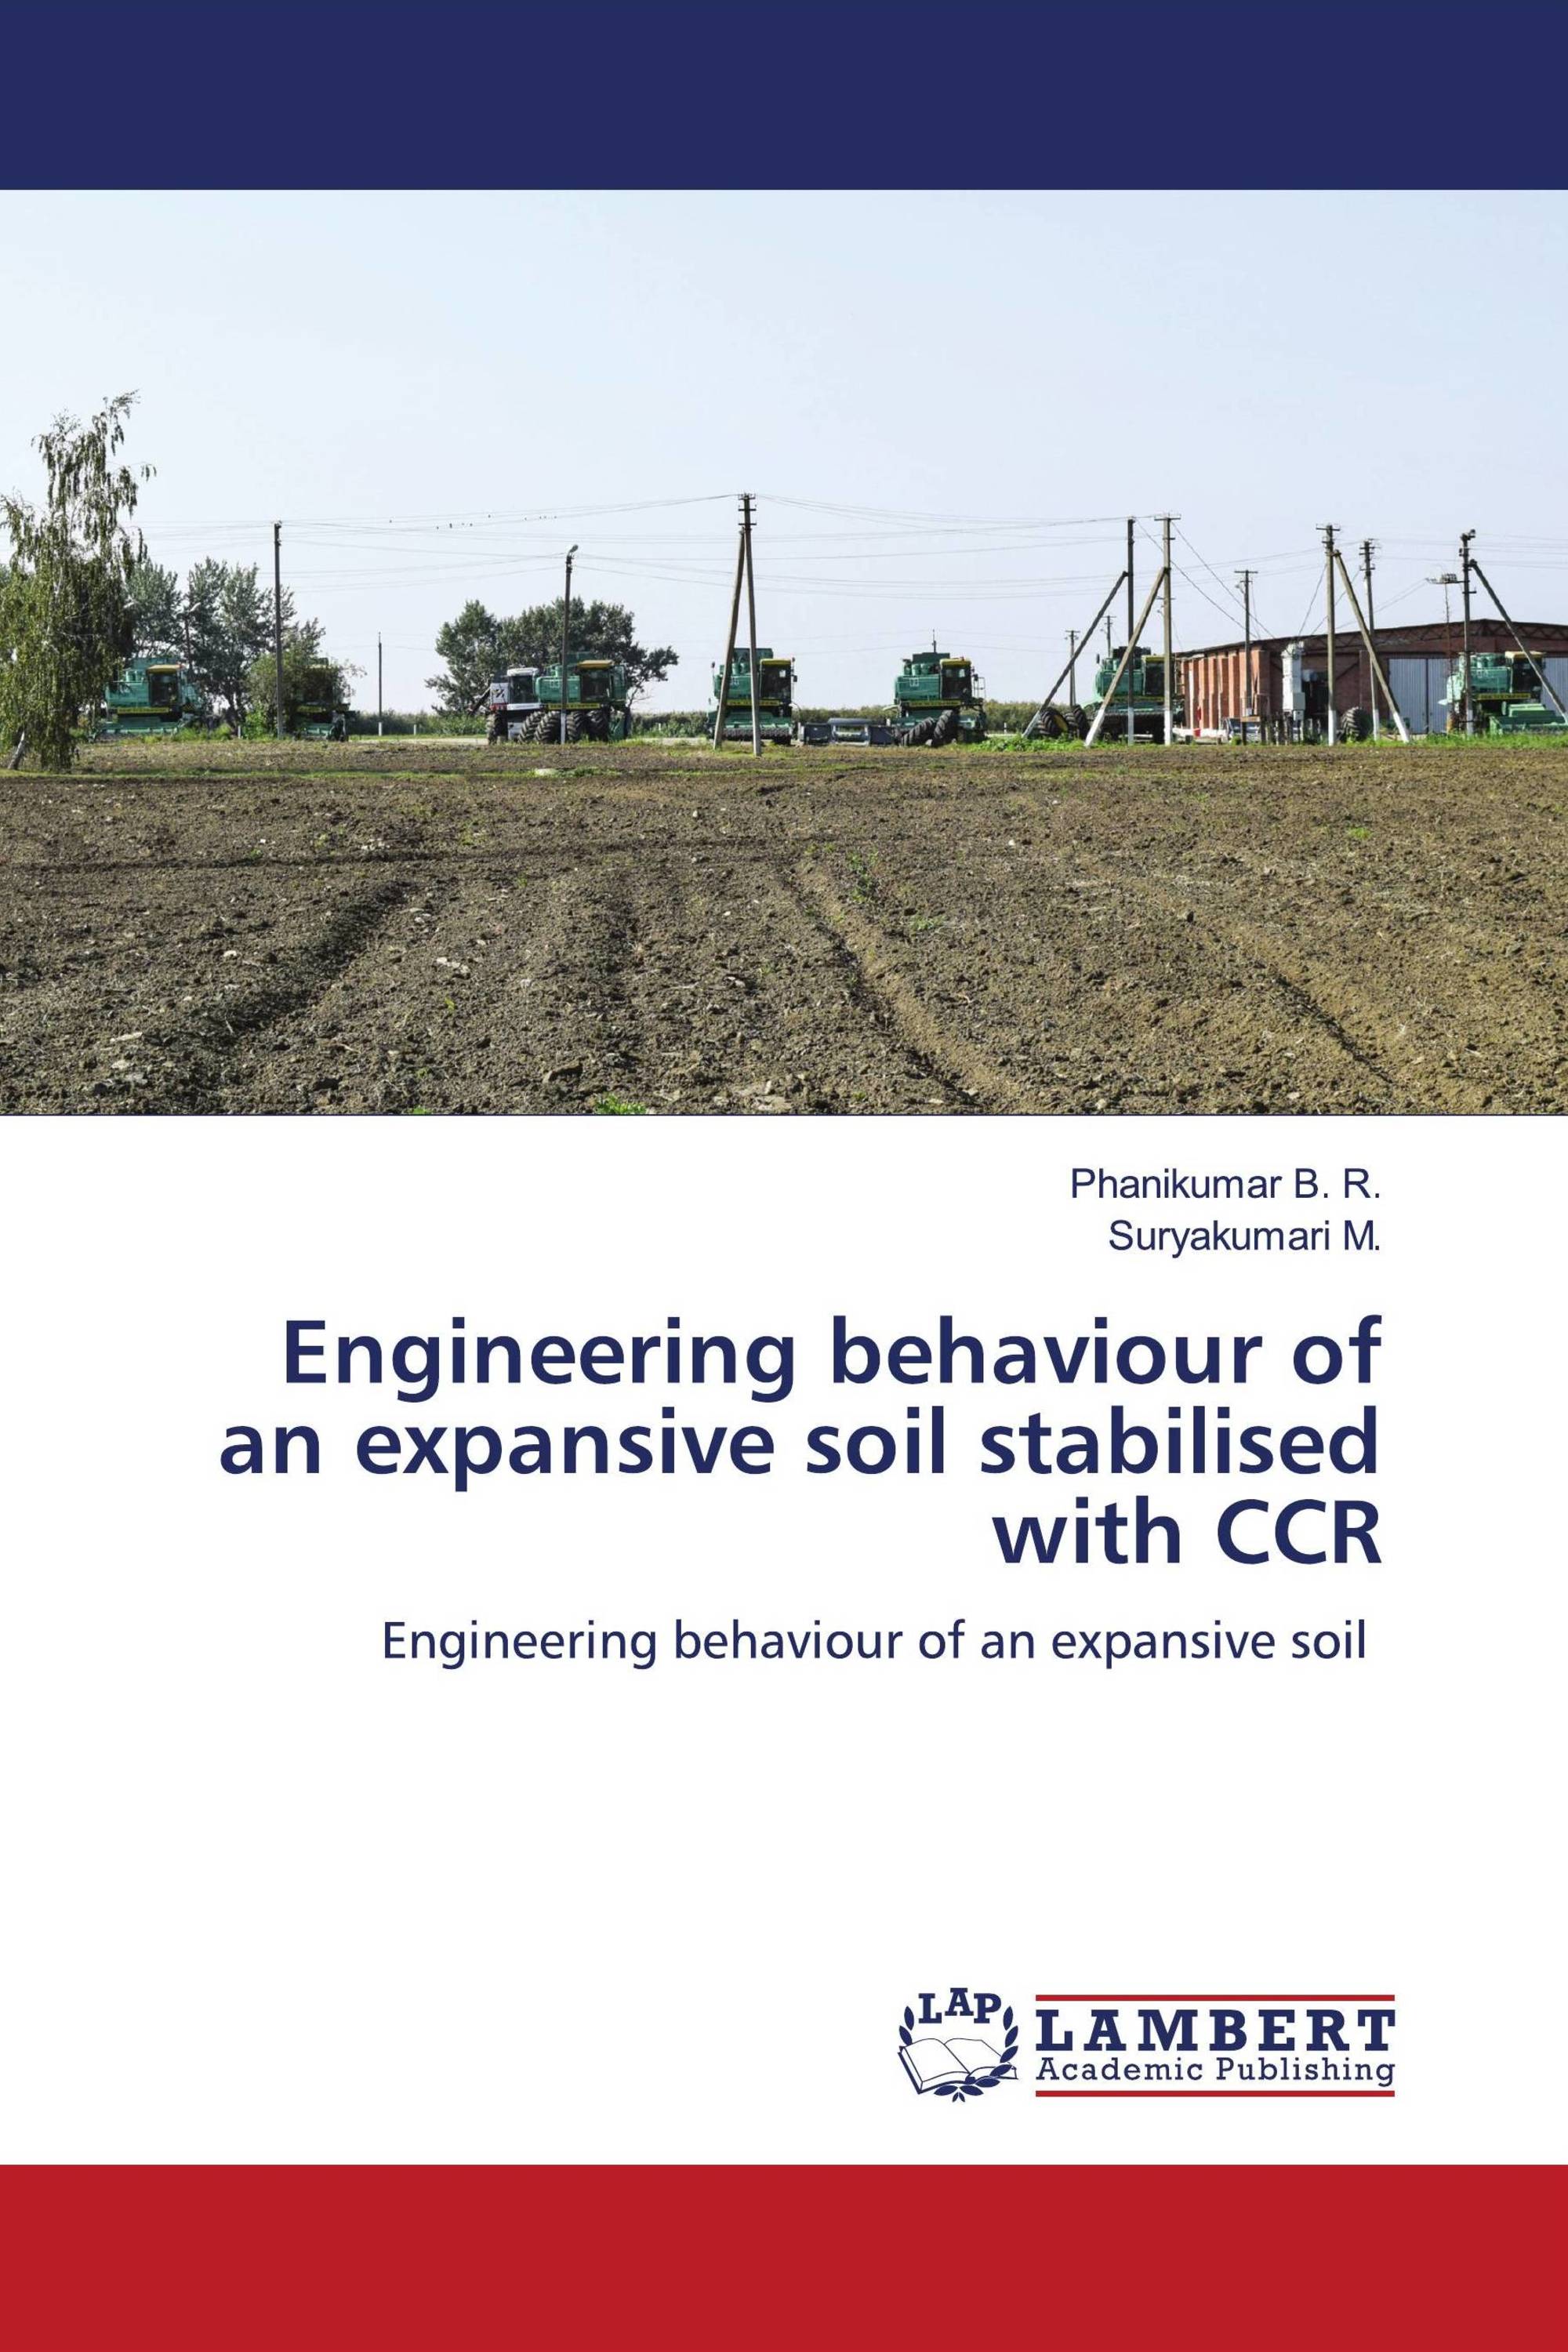 Engineering behaviour of an expansive soil stabilised with CCR